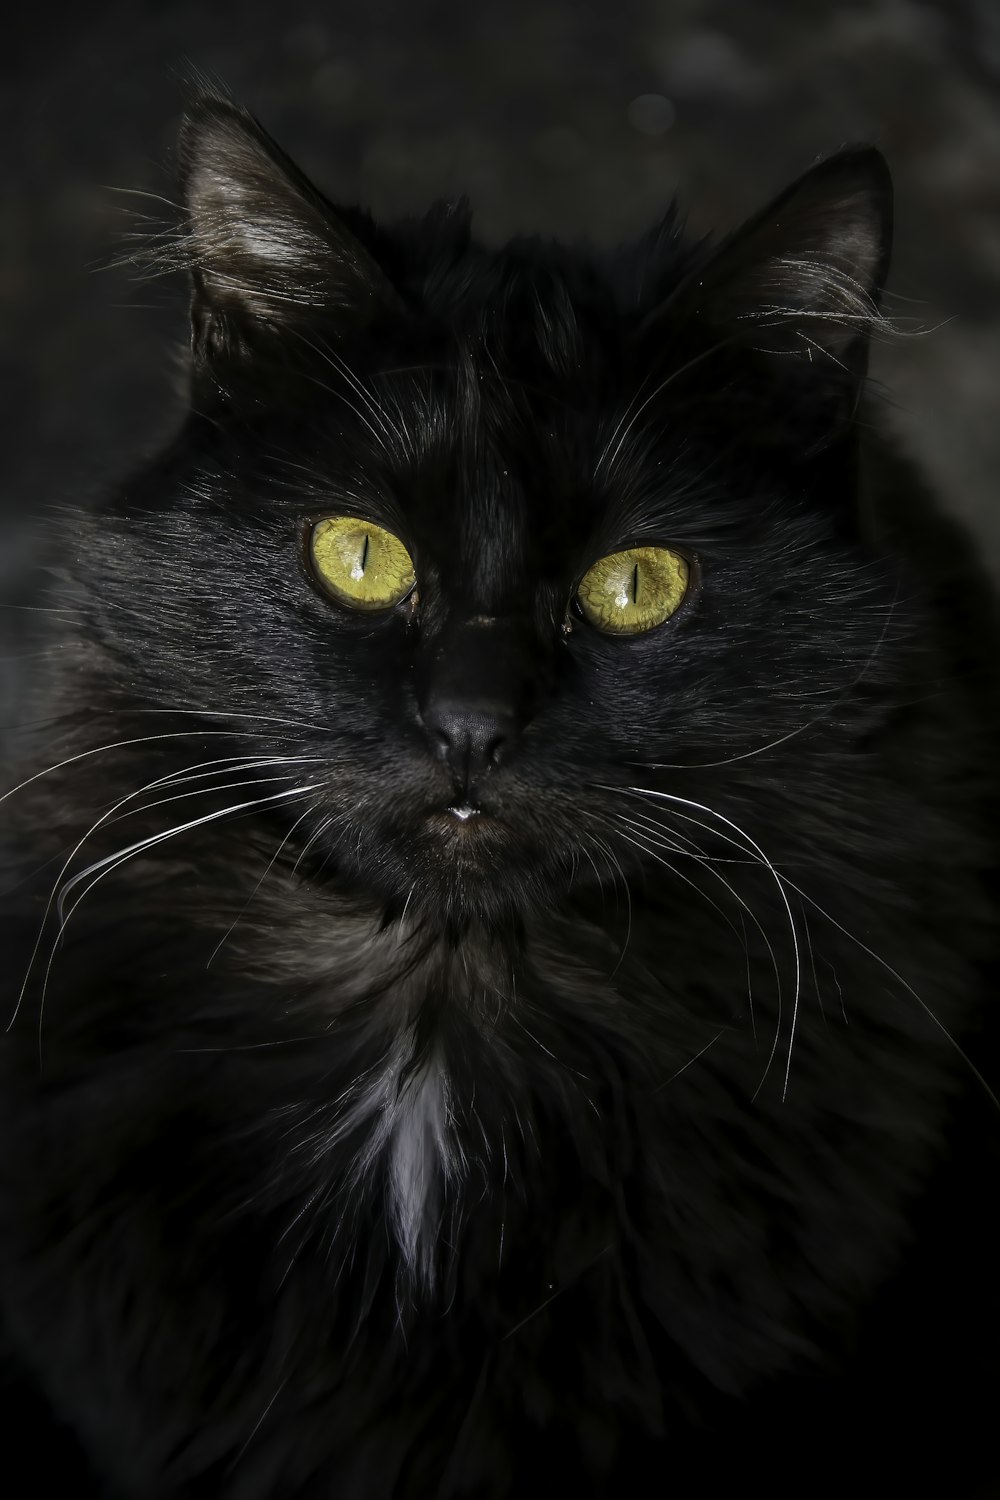 a black cat with yellow eyes